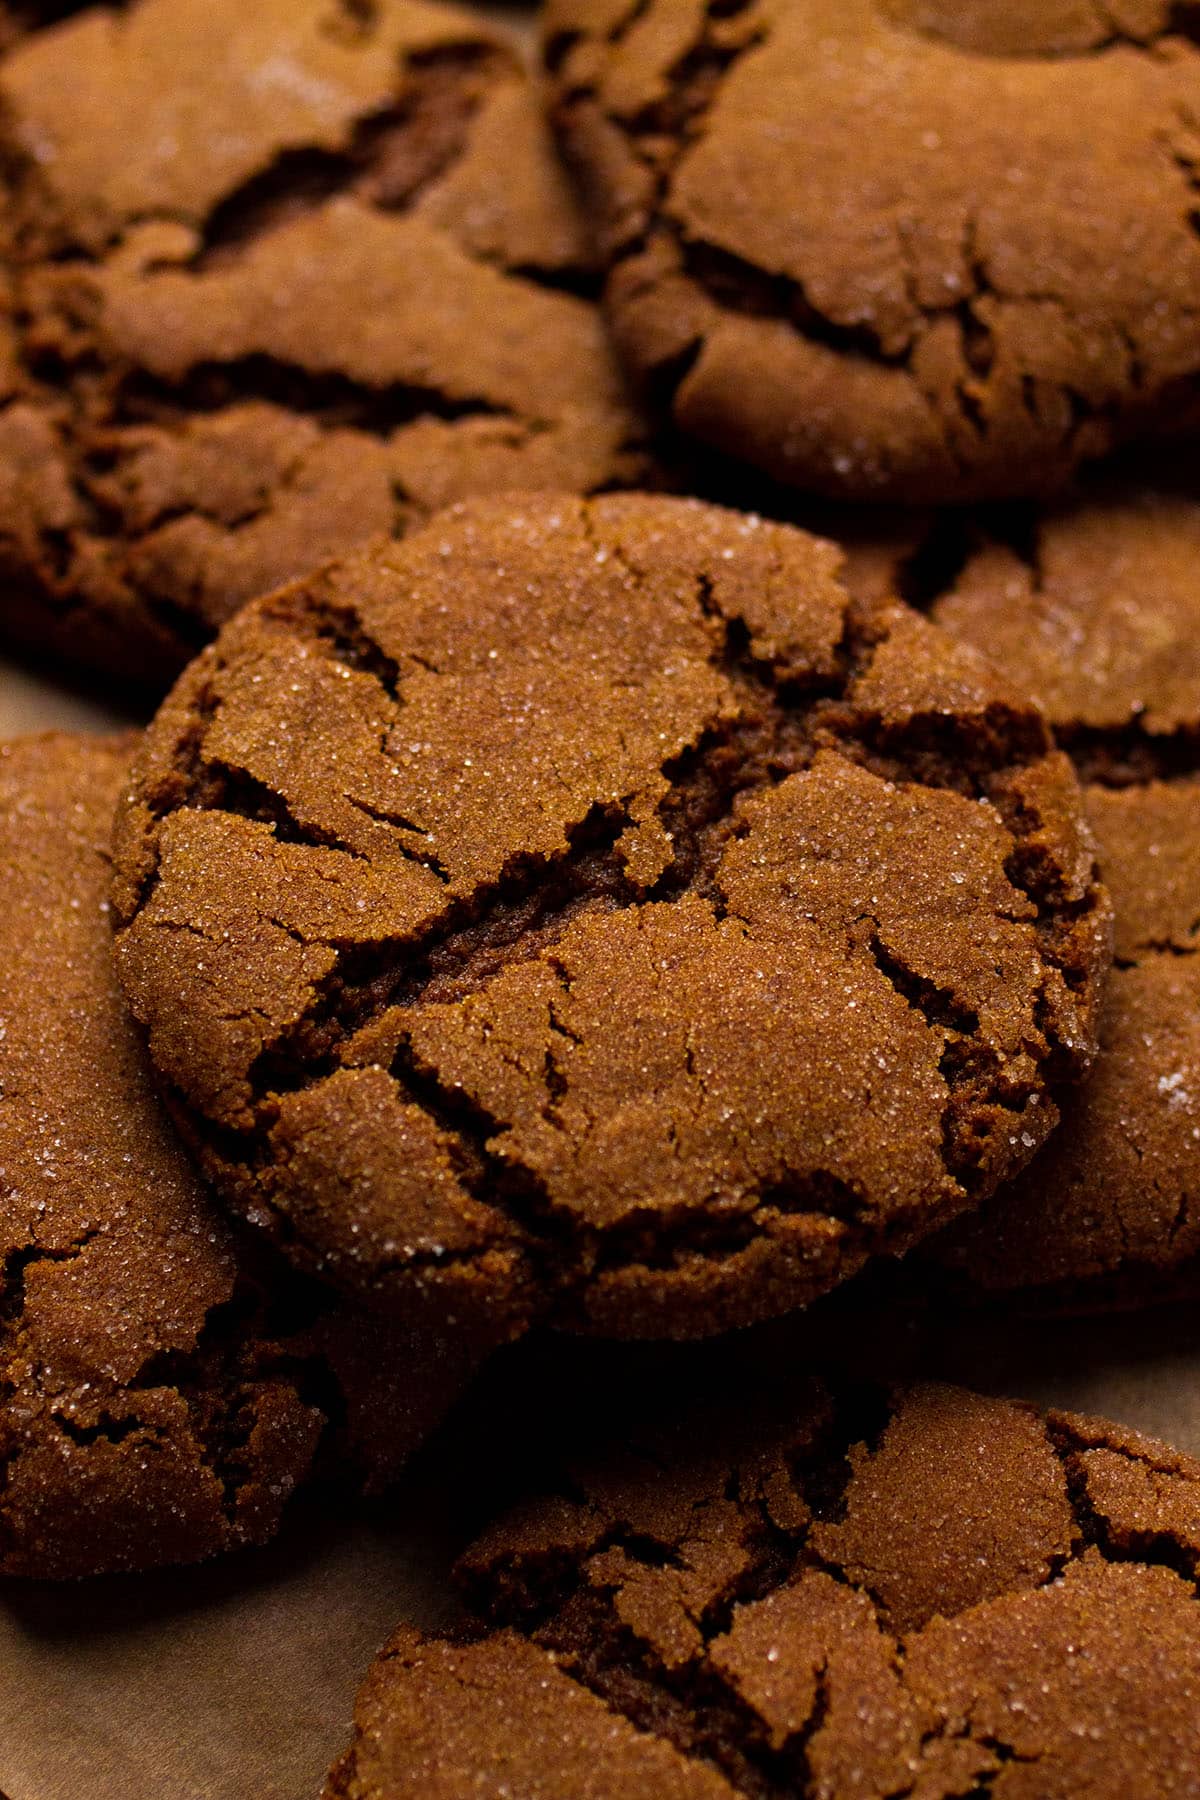 Several gingersnaps stacked on top of each other.